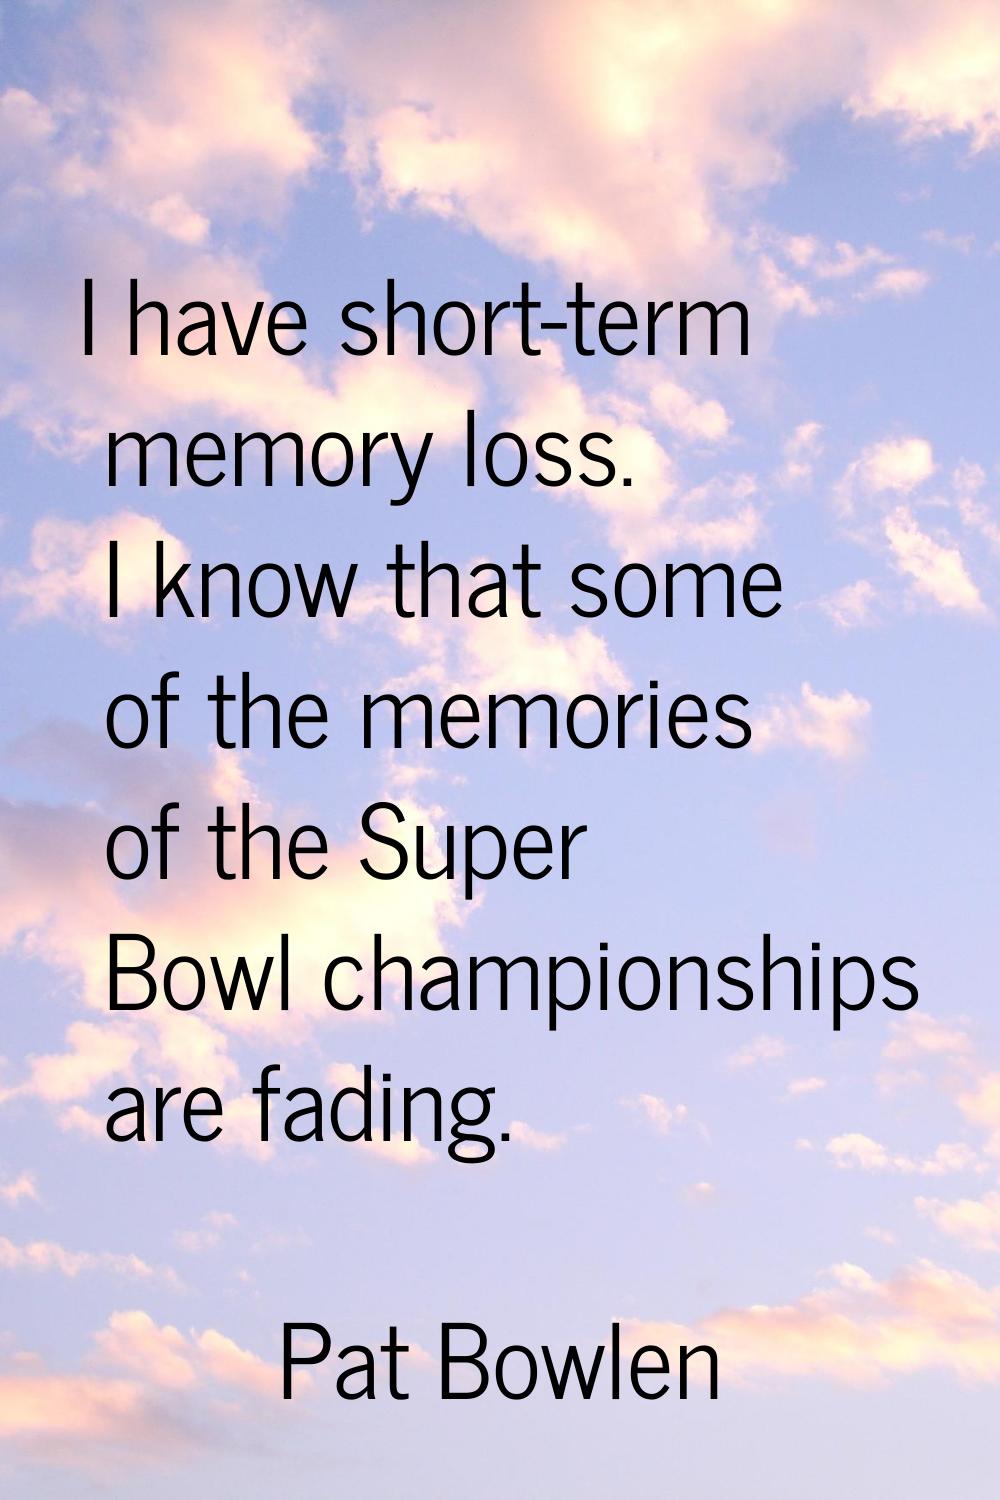 I have short-term memory loss. I know that some of the memories of the Super Bowl championships are